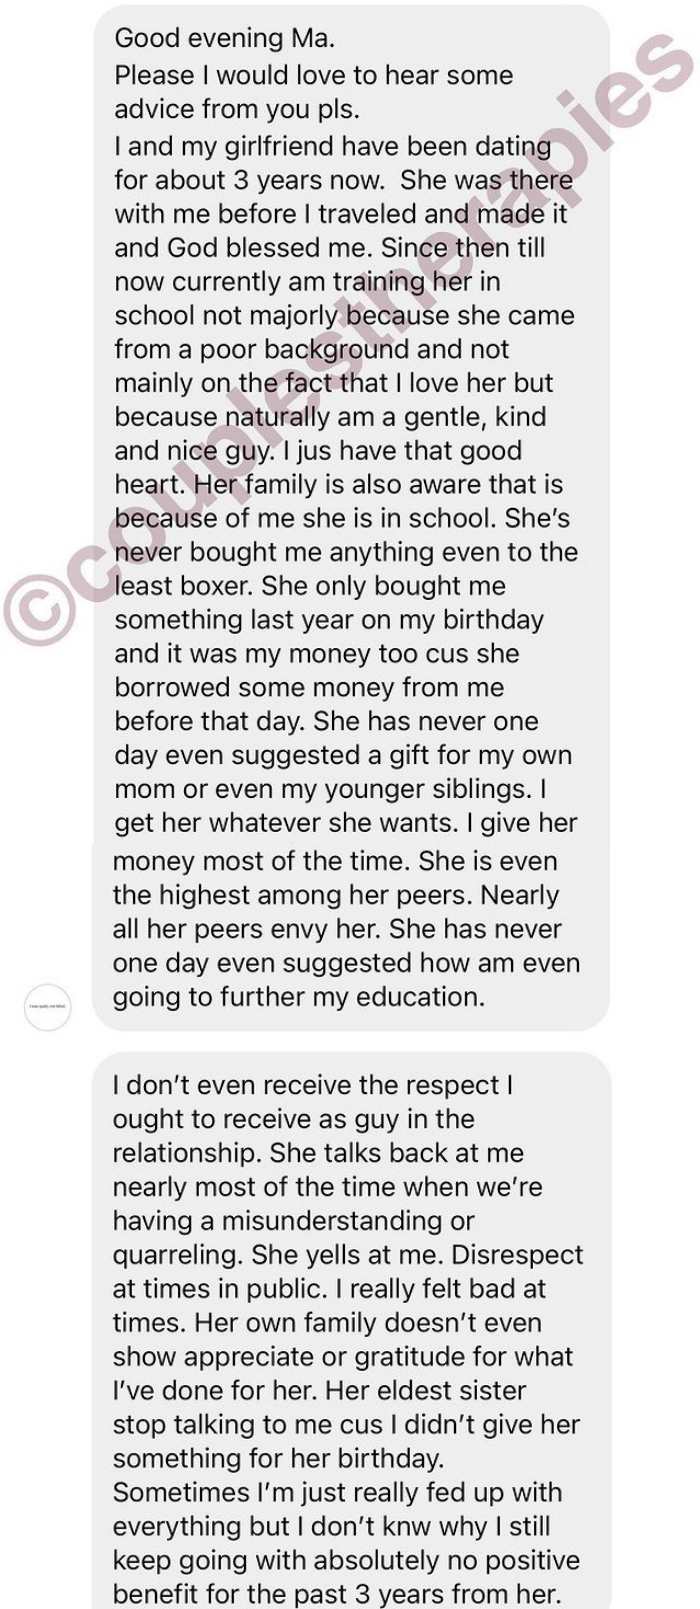 Man cries out for advice over disrespect from girlfriend despite sponsoring her education